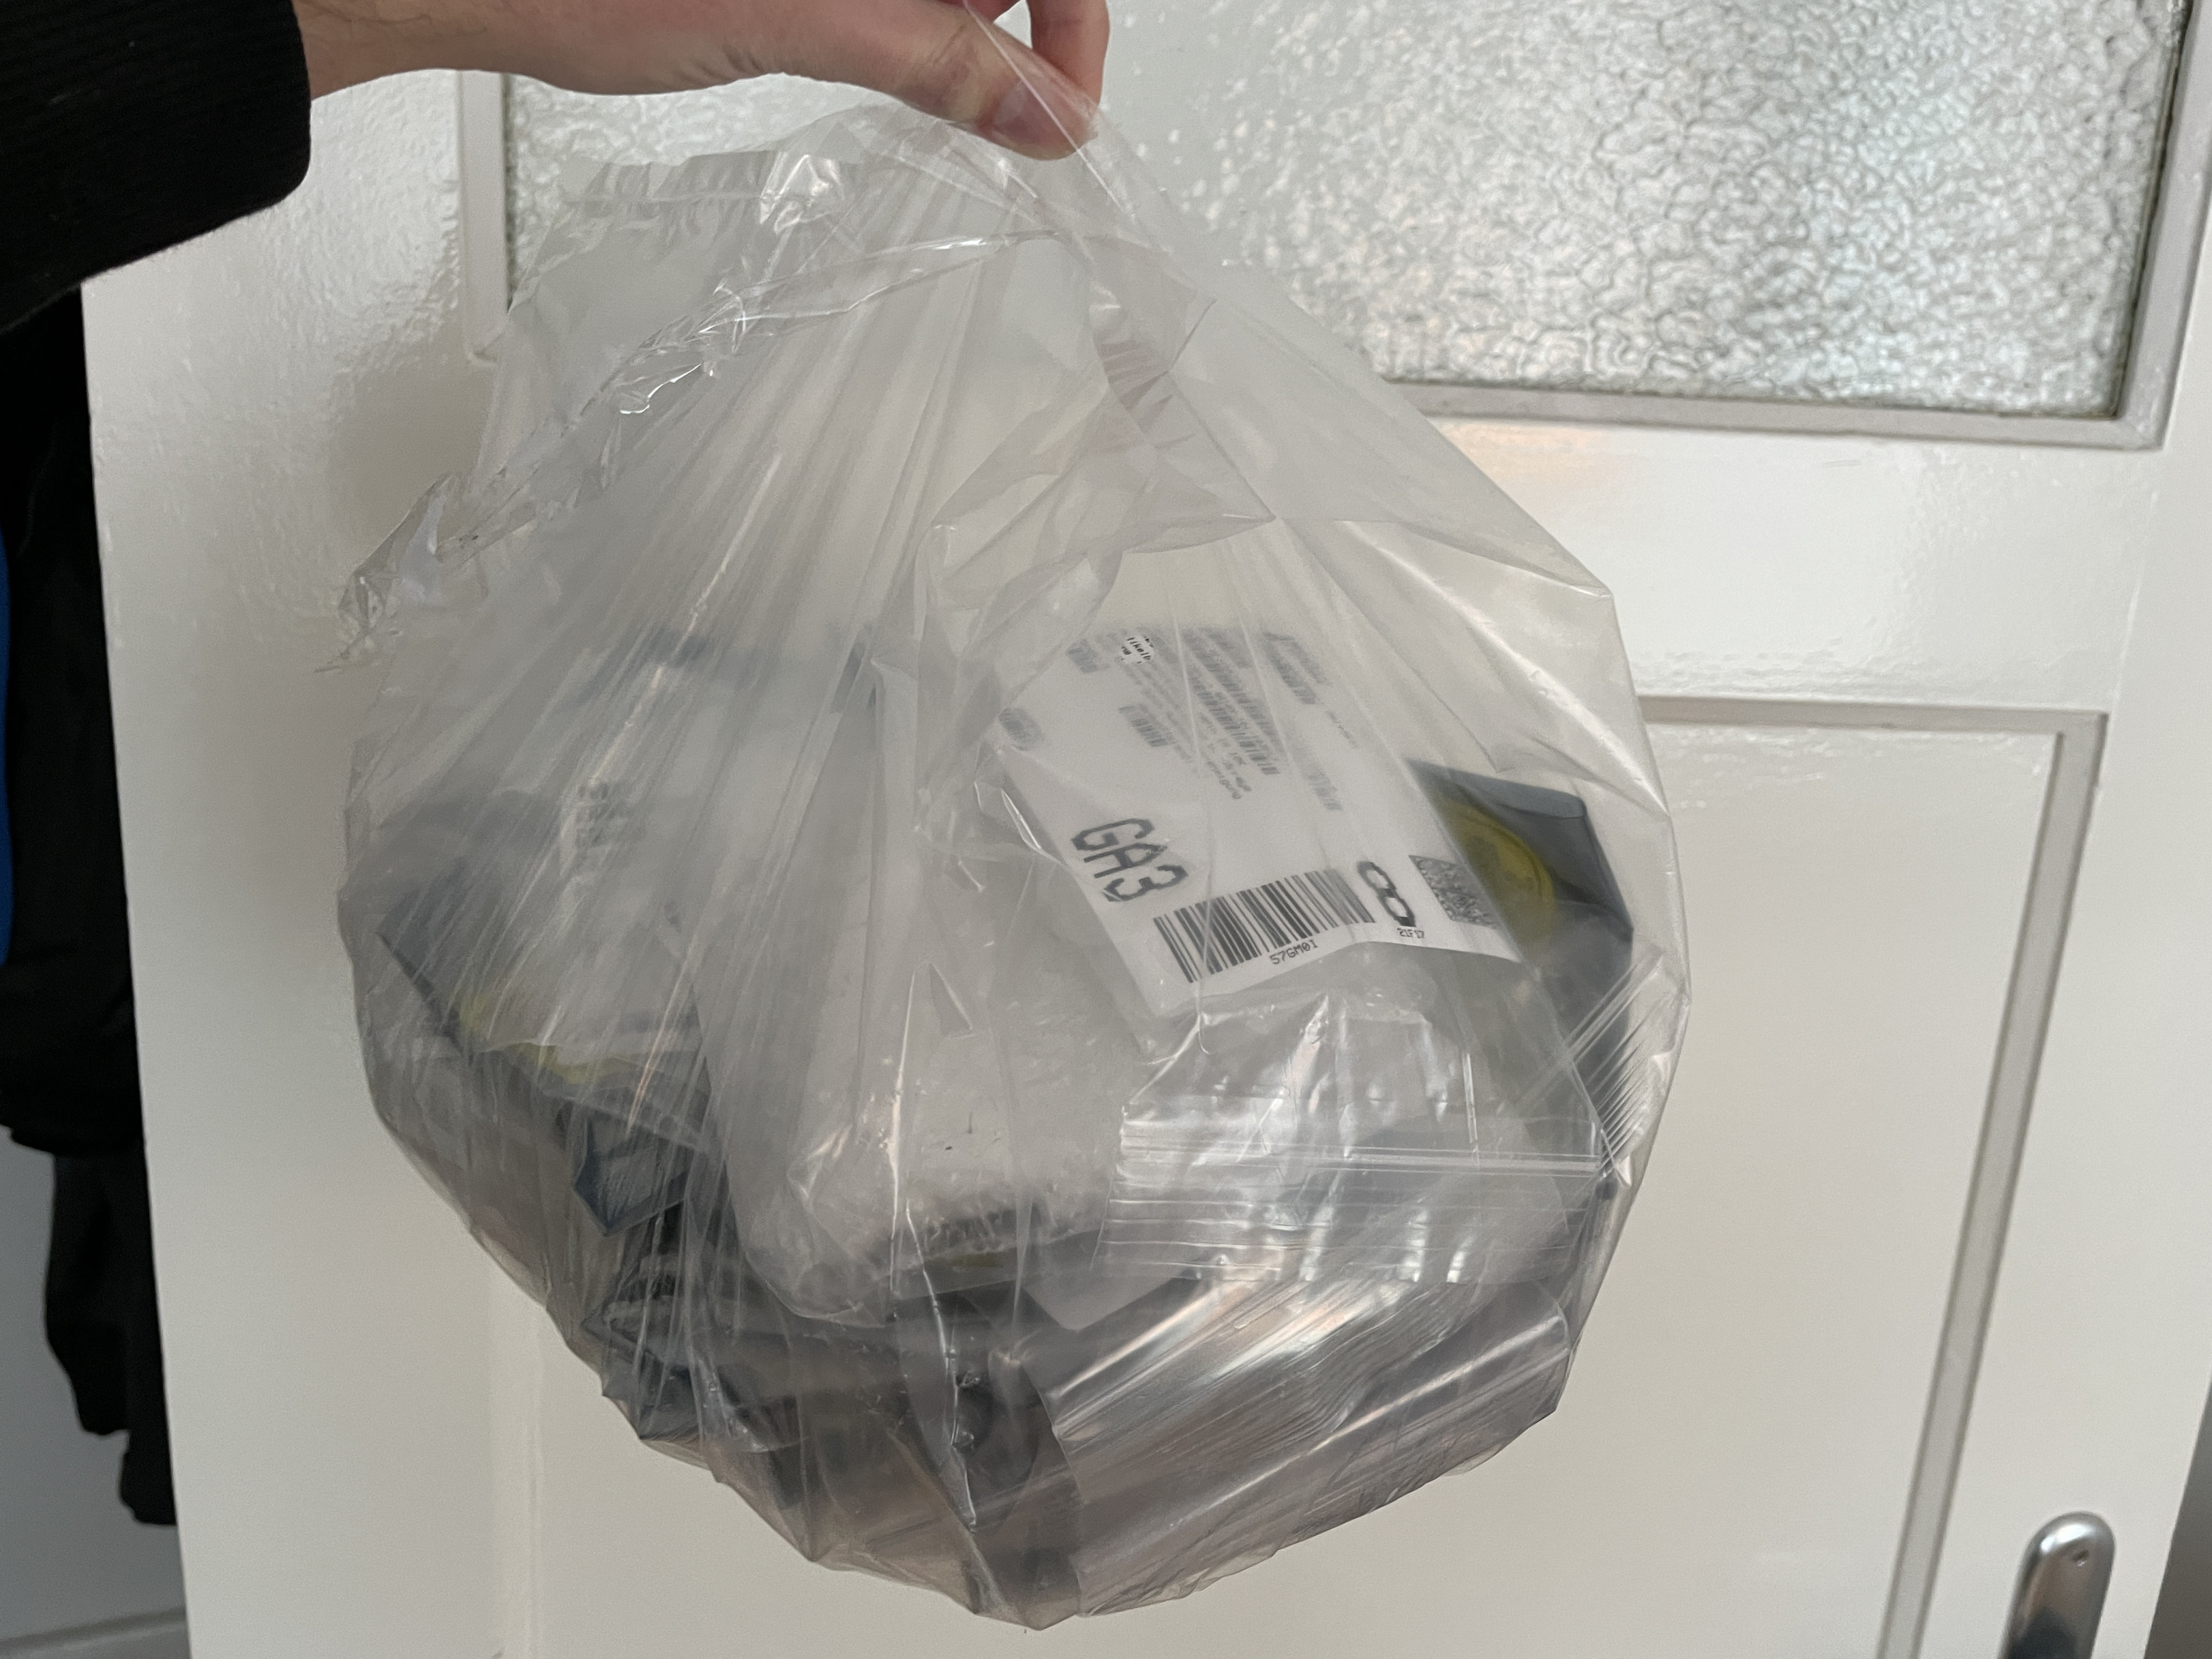 Big plastic bag of components from Mouser